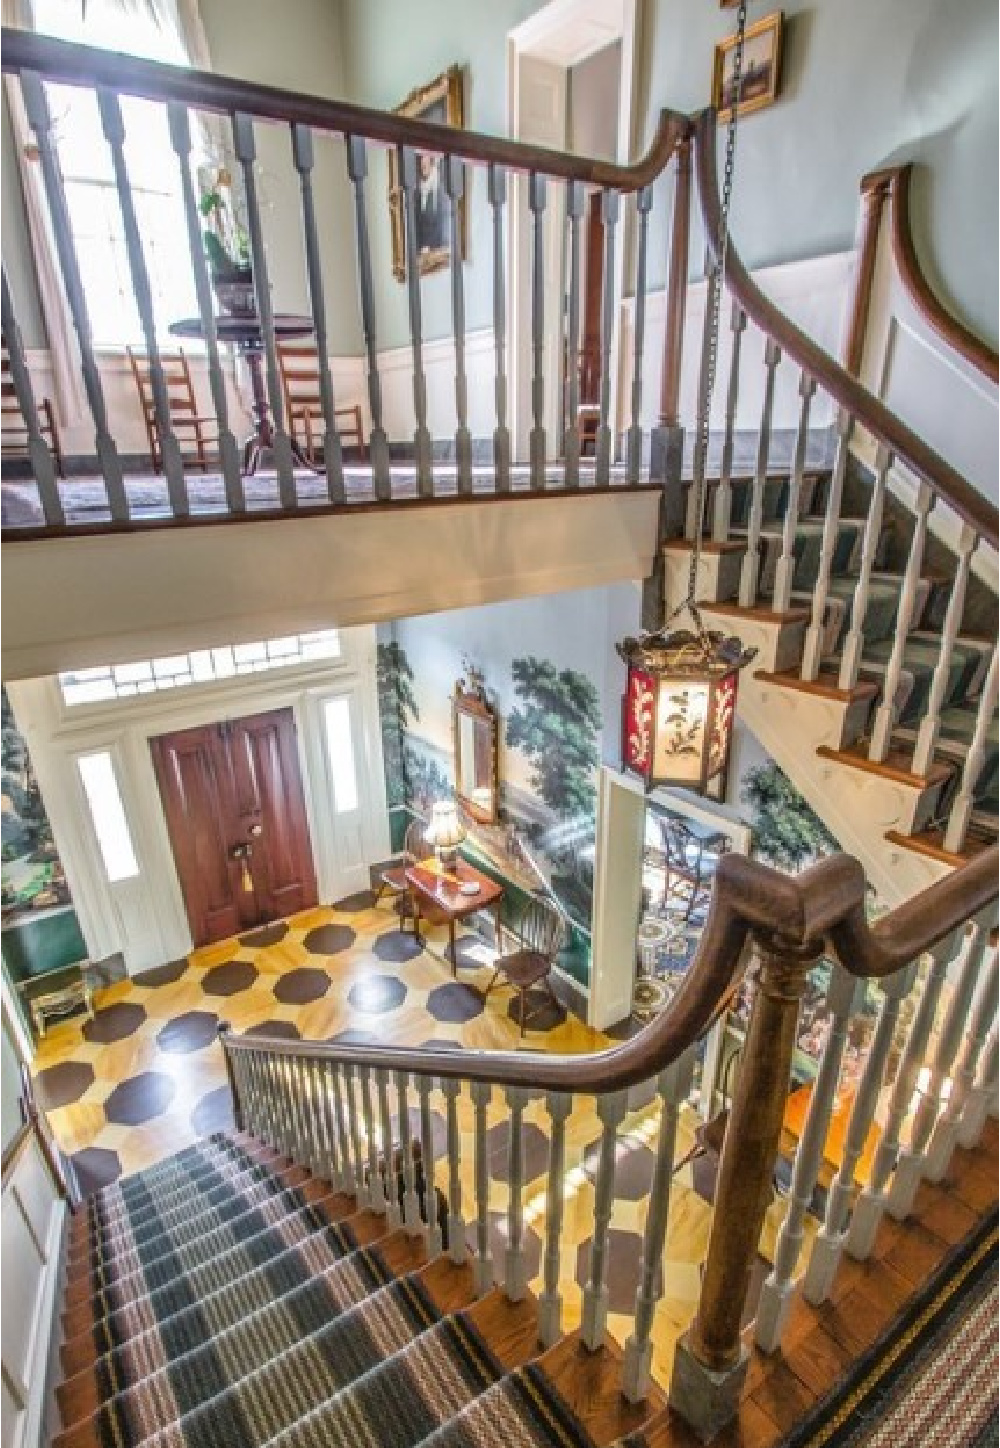 Dramatic entry and staircase - 3200 Del Rio Pike in Franklin - Meeting of the Waters house. #historichomes #franklintn